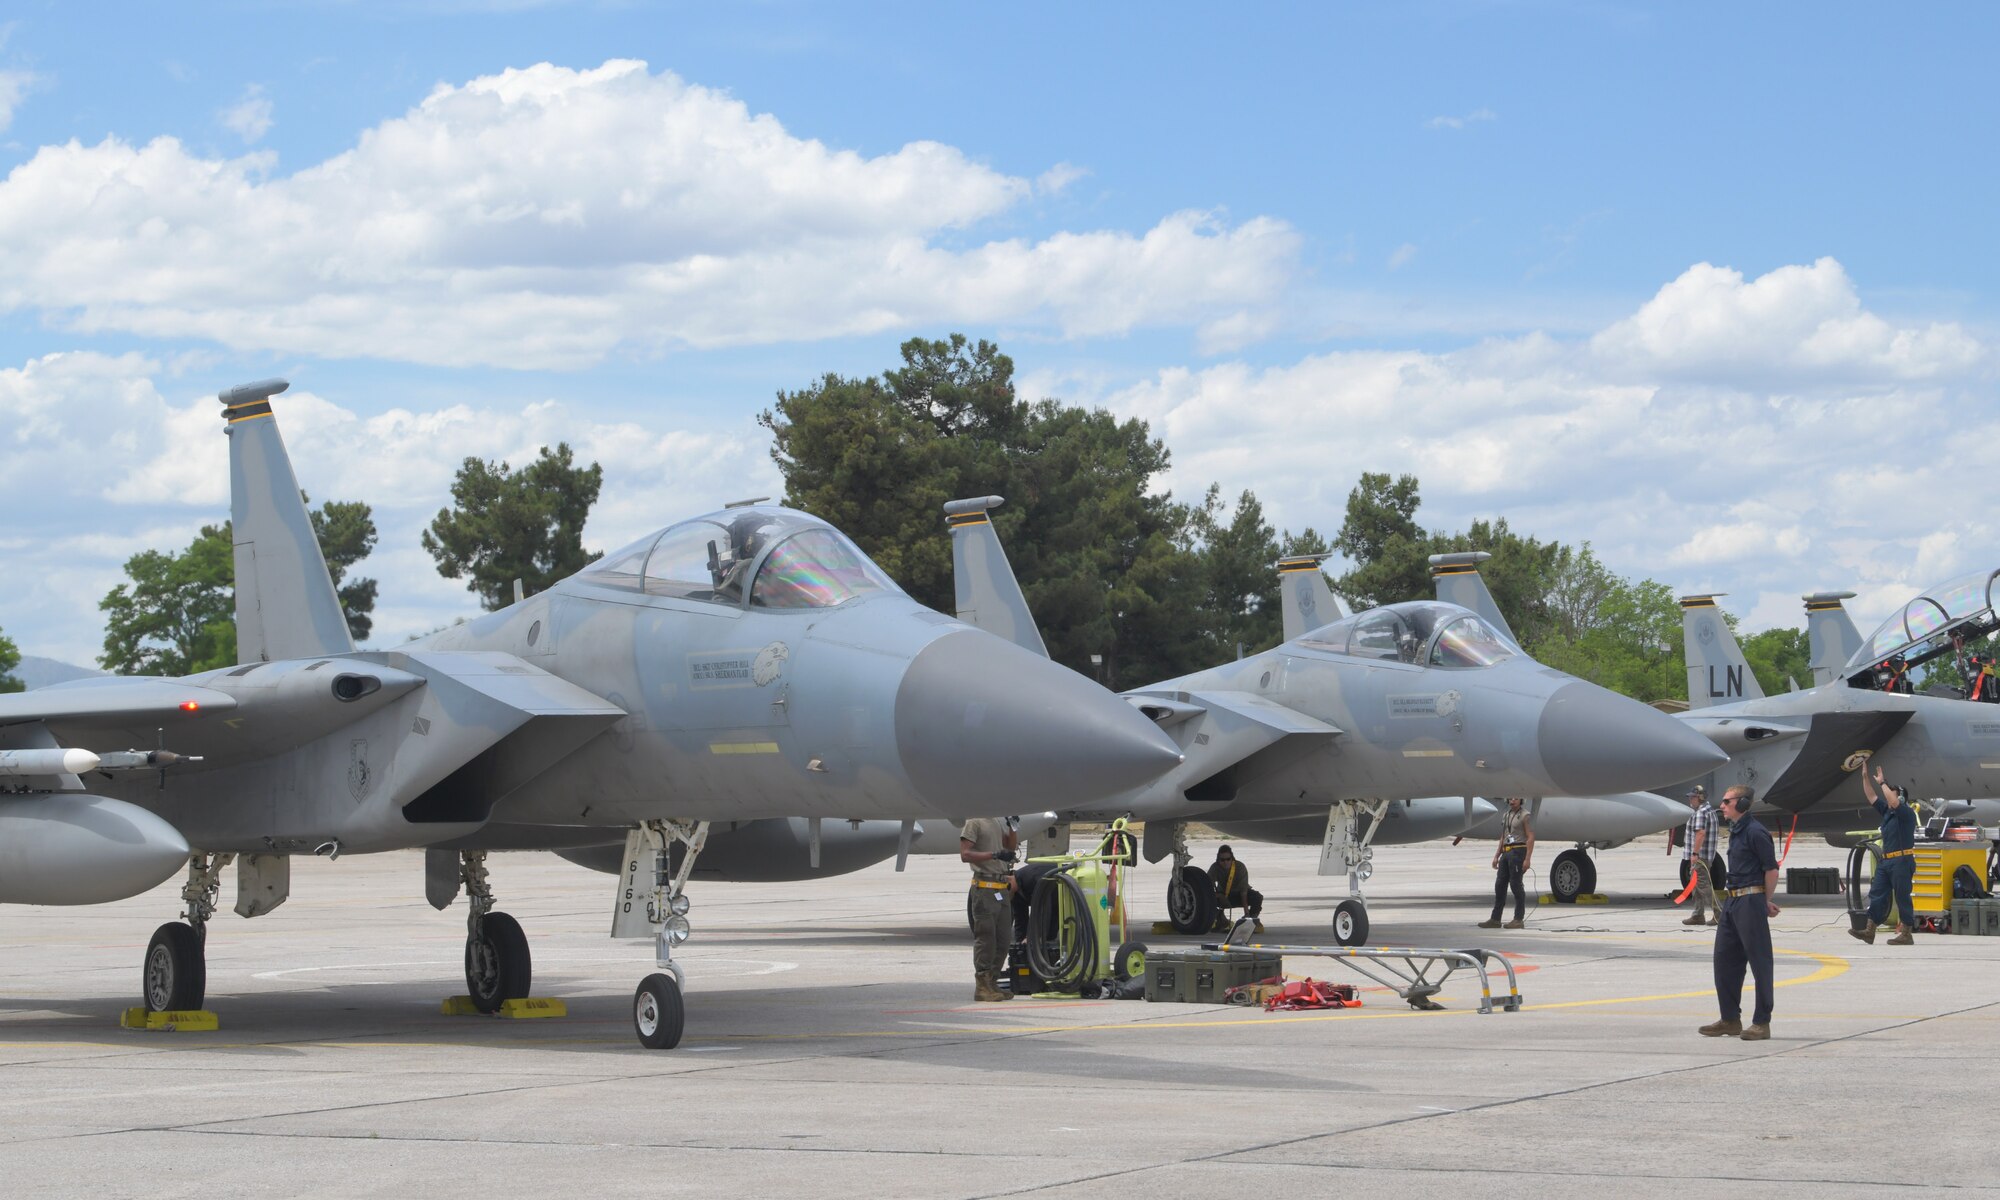 U.S. Air Force F-15C Eagles assigned to the 493th Fighter Squadron park after a sortie during exercise Astral Knight 21 at Larissa Air Base, Greece, May 20, 2021. During Astral Knight 21, the Liberty Wing sharpened its ability to deploy capable, credible forces to operate from strategic locations, which is enabled by strong regional partnerships critical for a rapid united response to adversaries around the world. (U.S. Air Force photo by Tech. Sgt. Alex Fox Echols III)